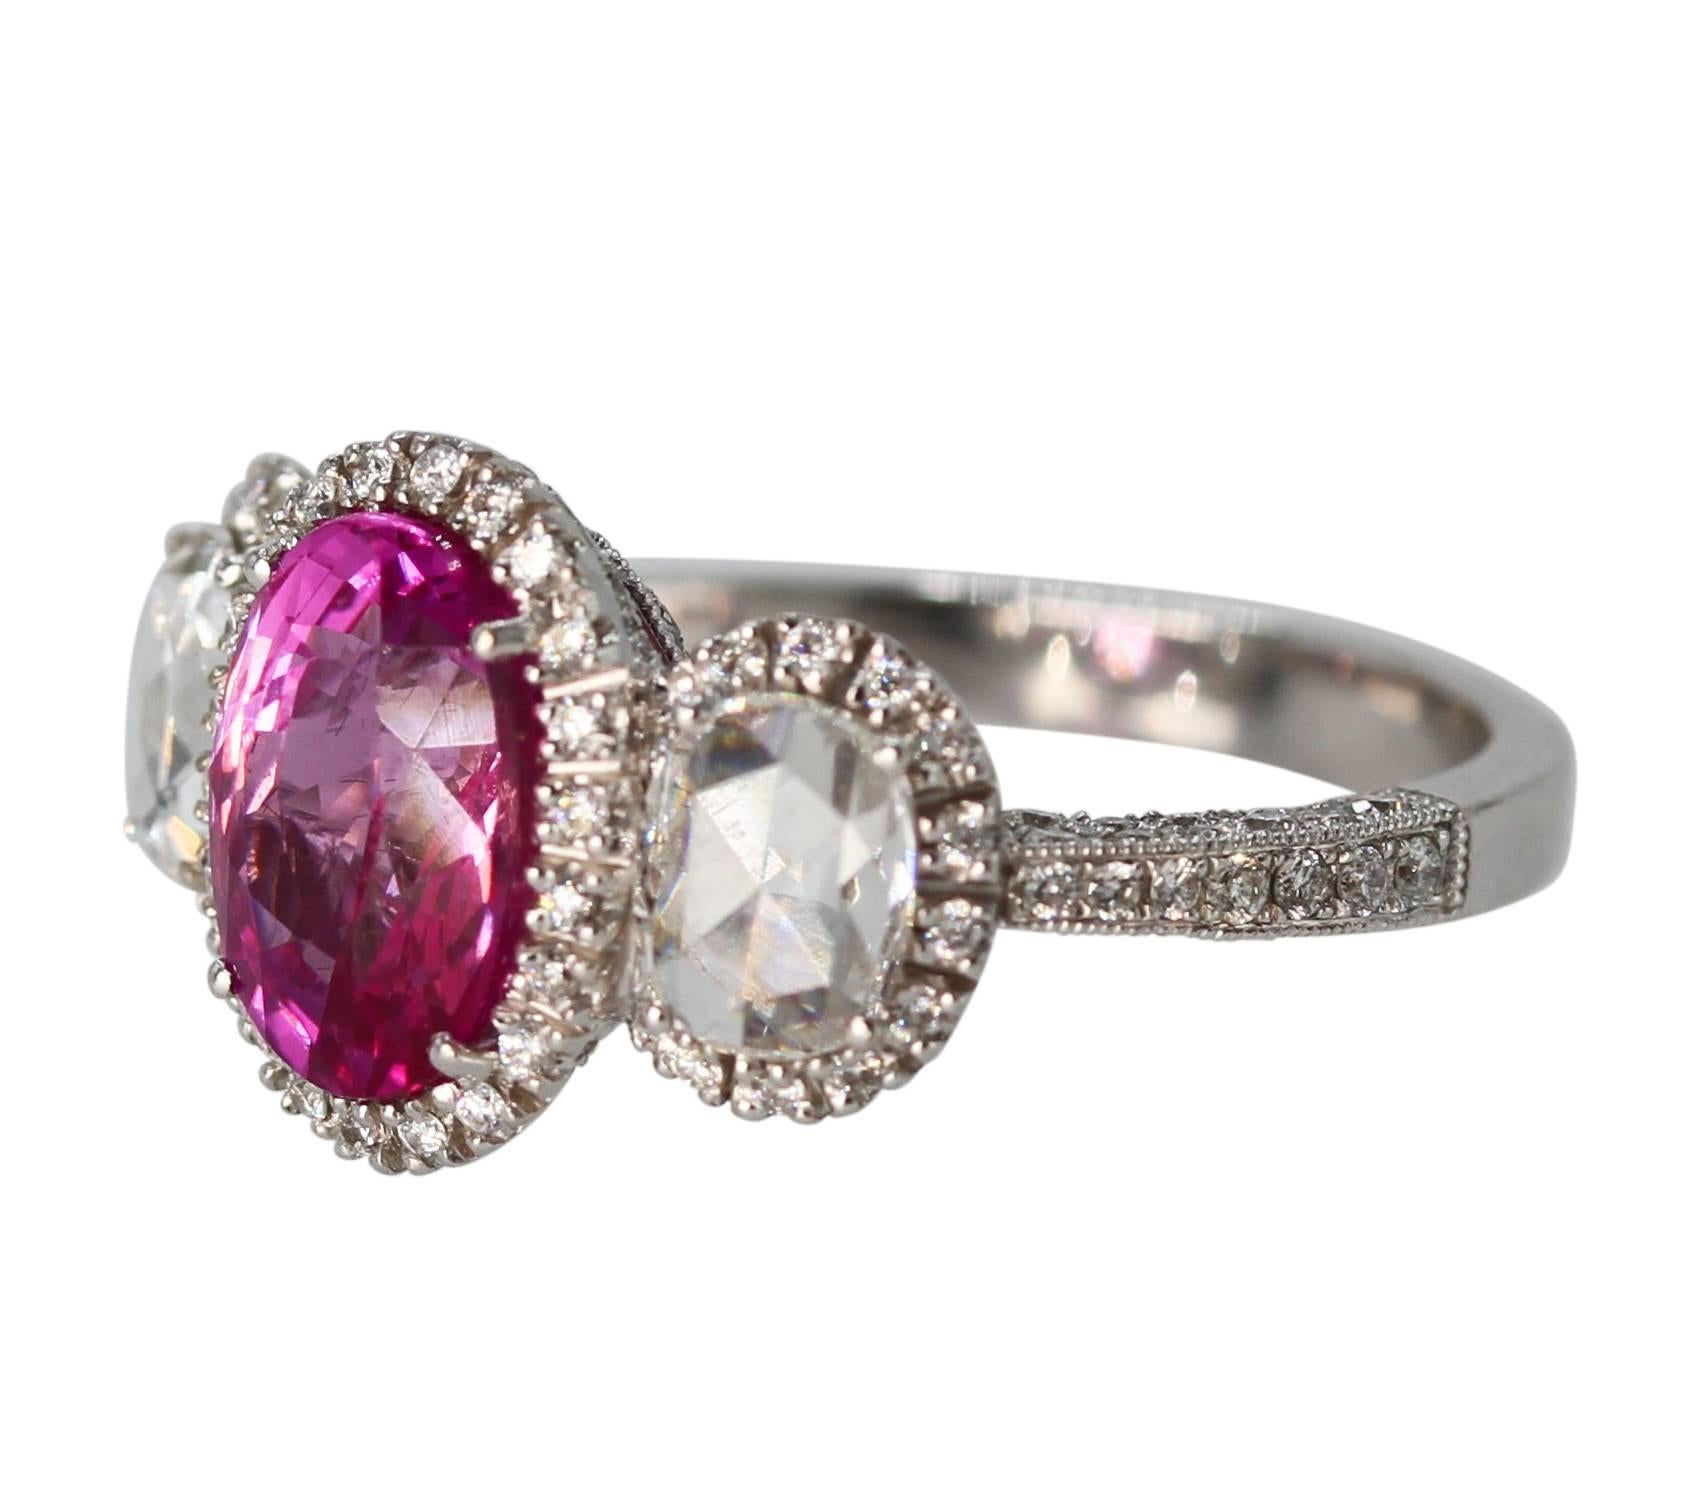 18 Karat White Gold, Pink Sapphire and Diamond Ring
• Oval pink sapphire weighing approximately 2.50 carats
• 2 rose-cut diamonds weighing approximately 0.70 carat
• 180 round diamonds weighing approximately 1.80 carats
• Gross weight 6.7